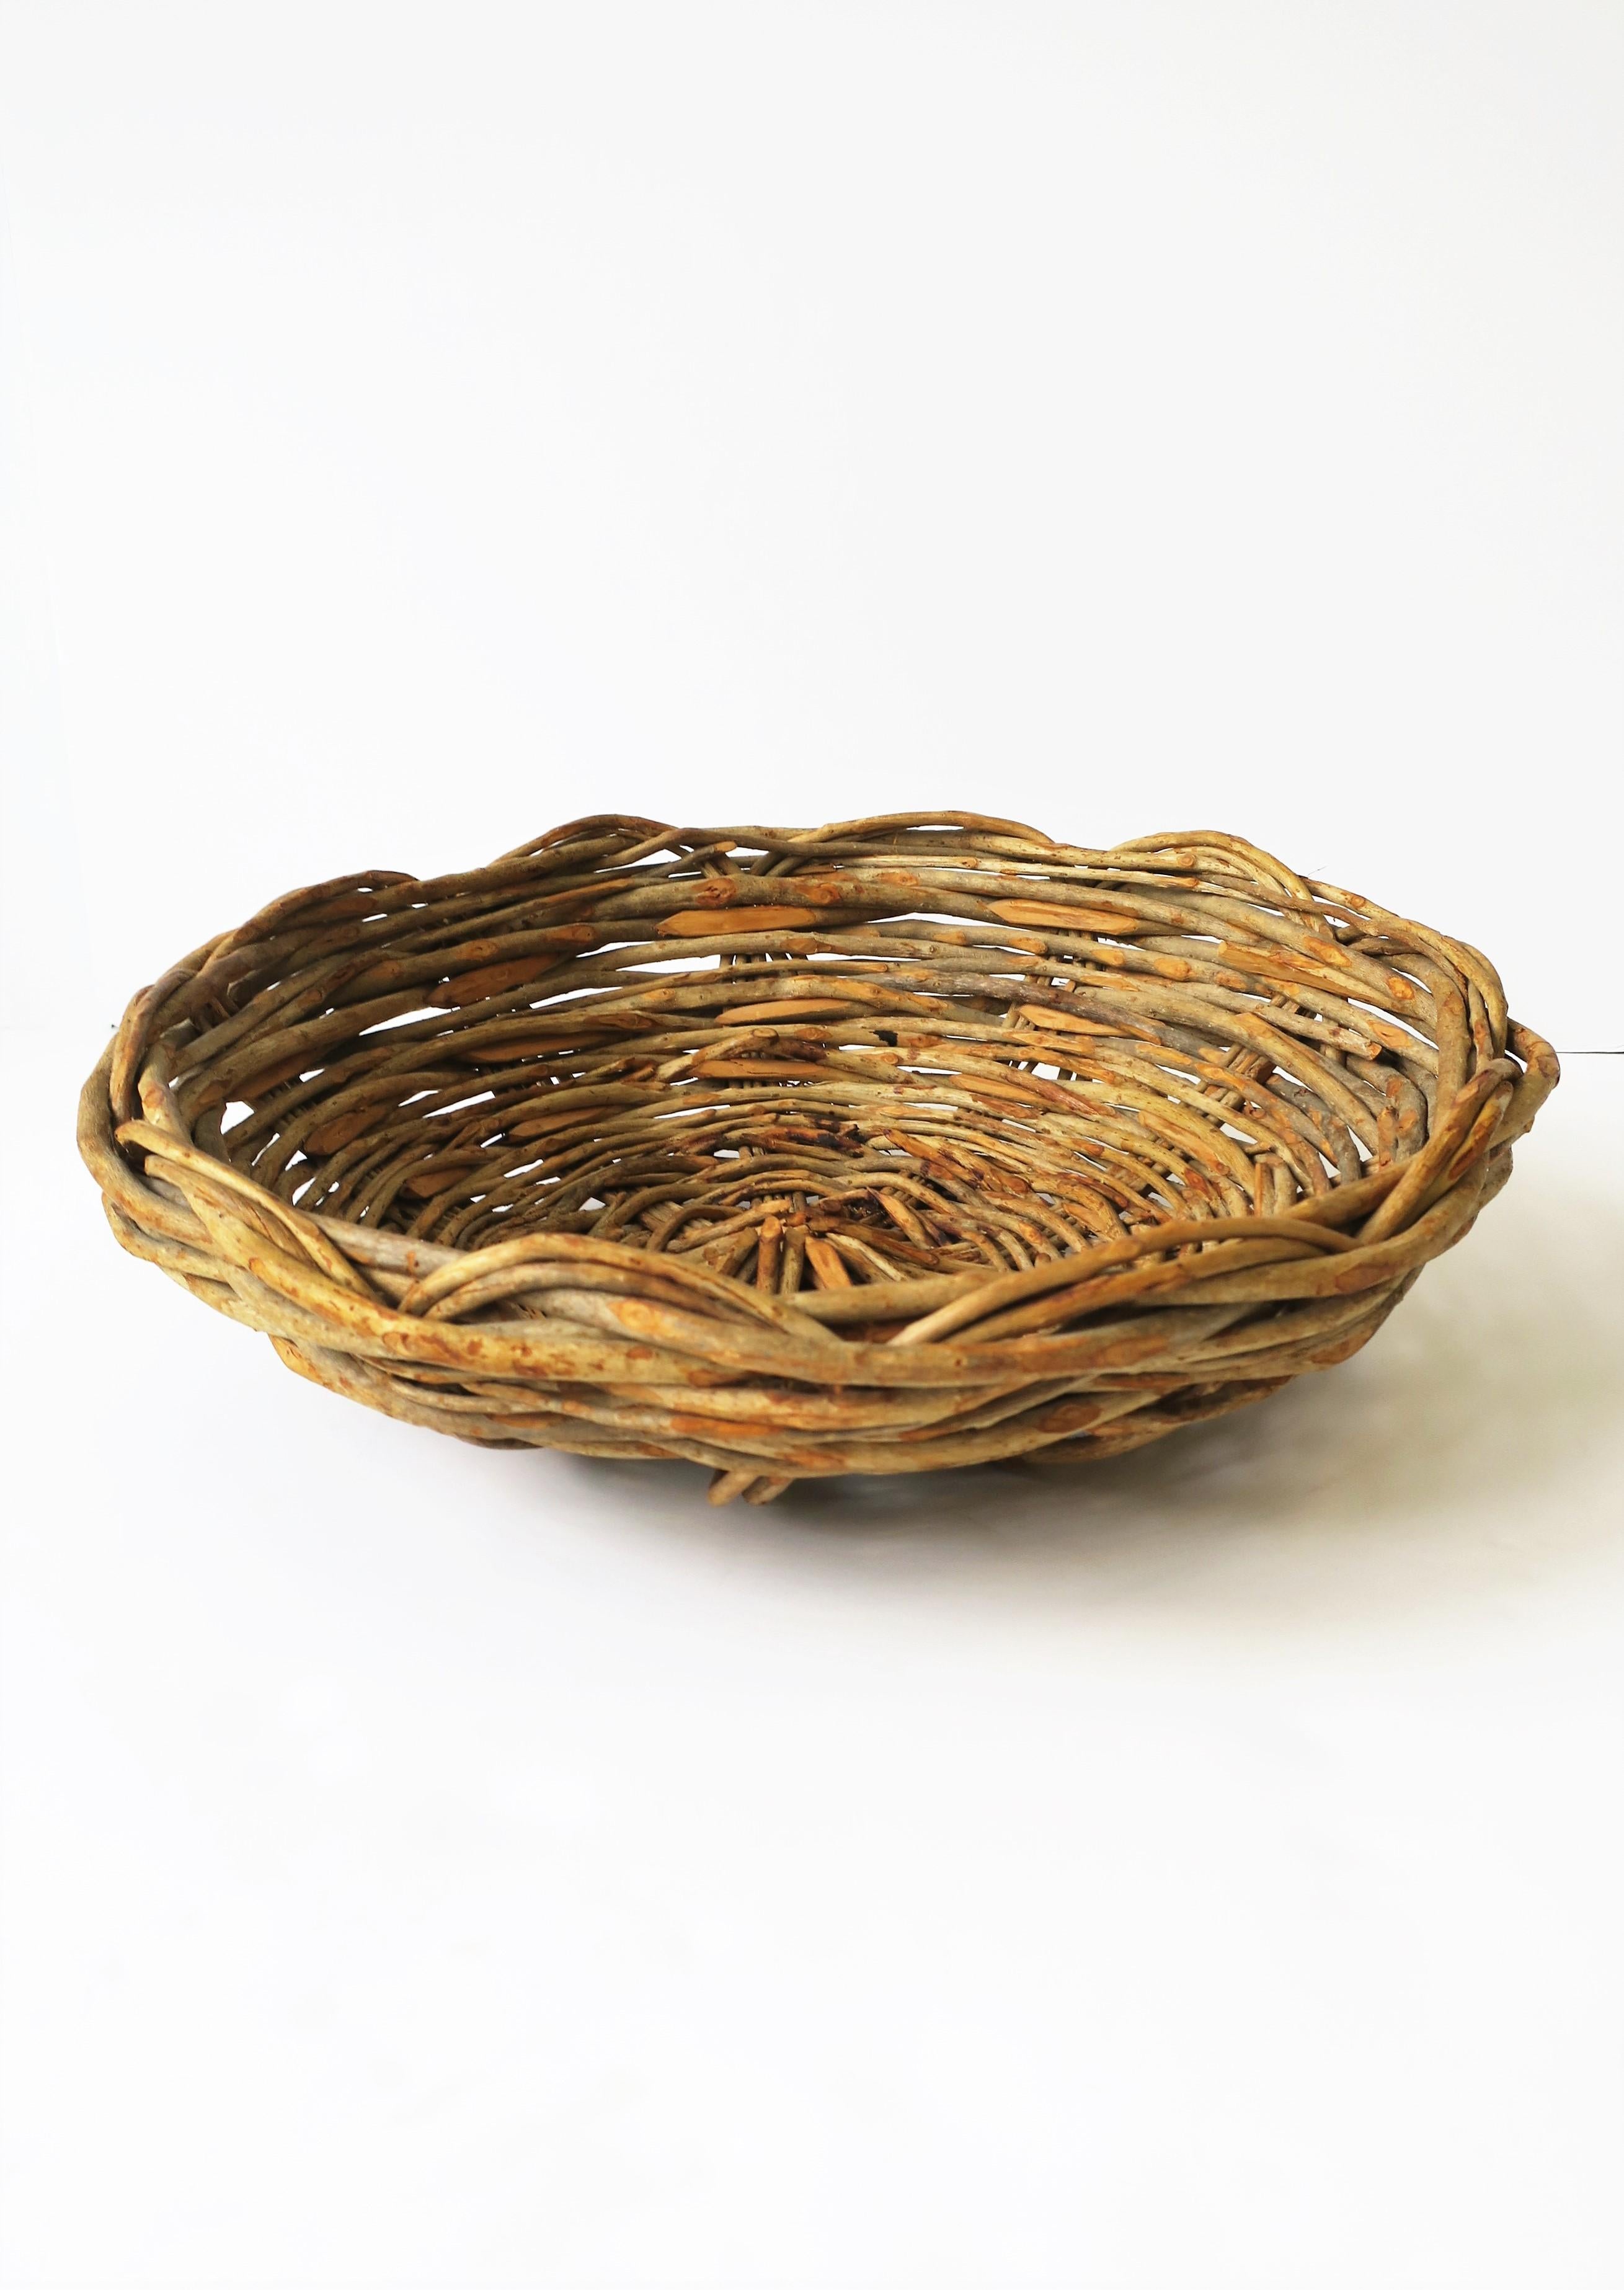 Wicker Basket Centerpiece Catchall, Round In Good Condition For Sale In New York, NY